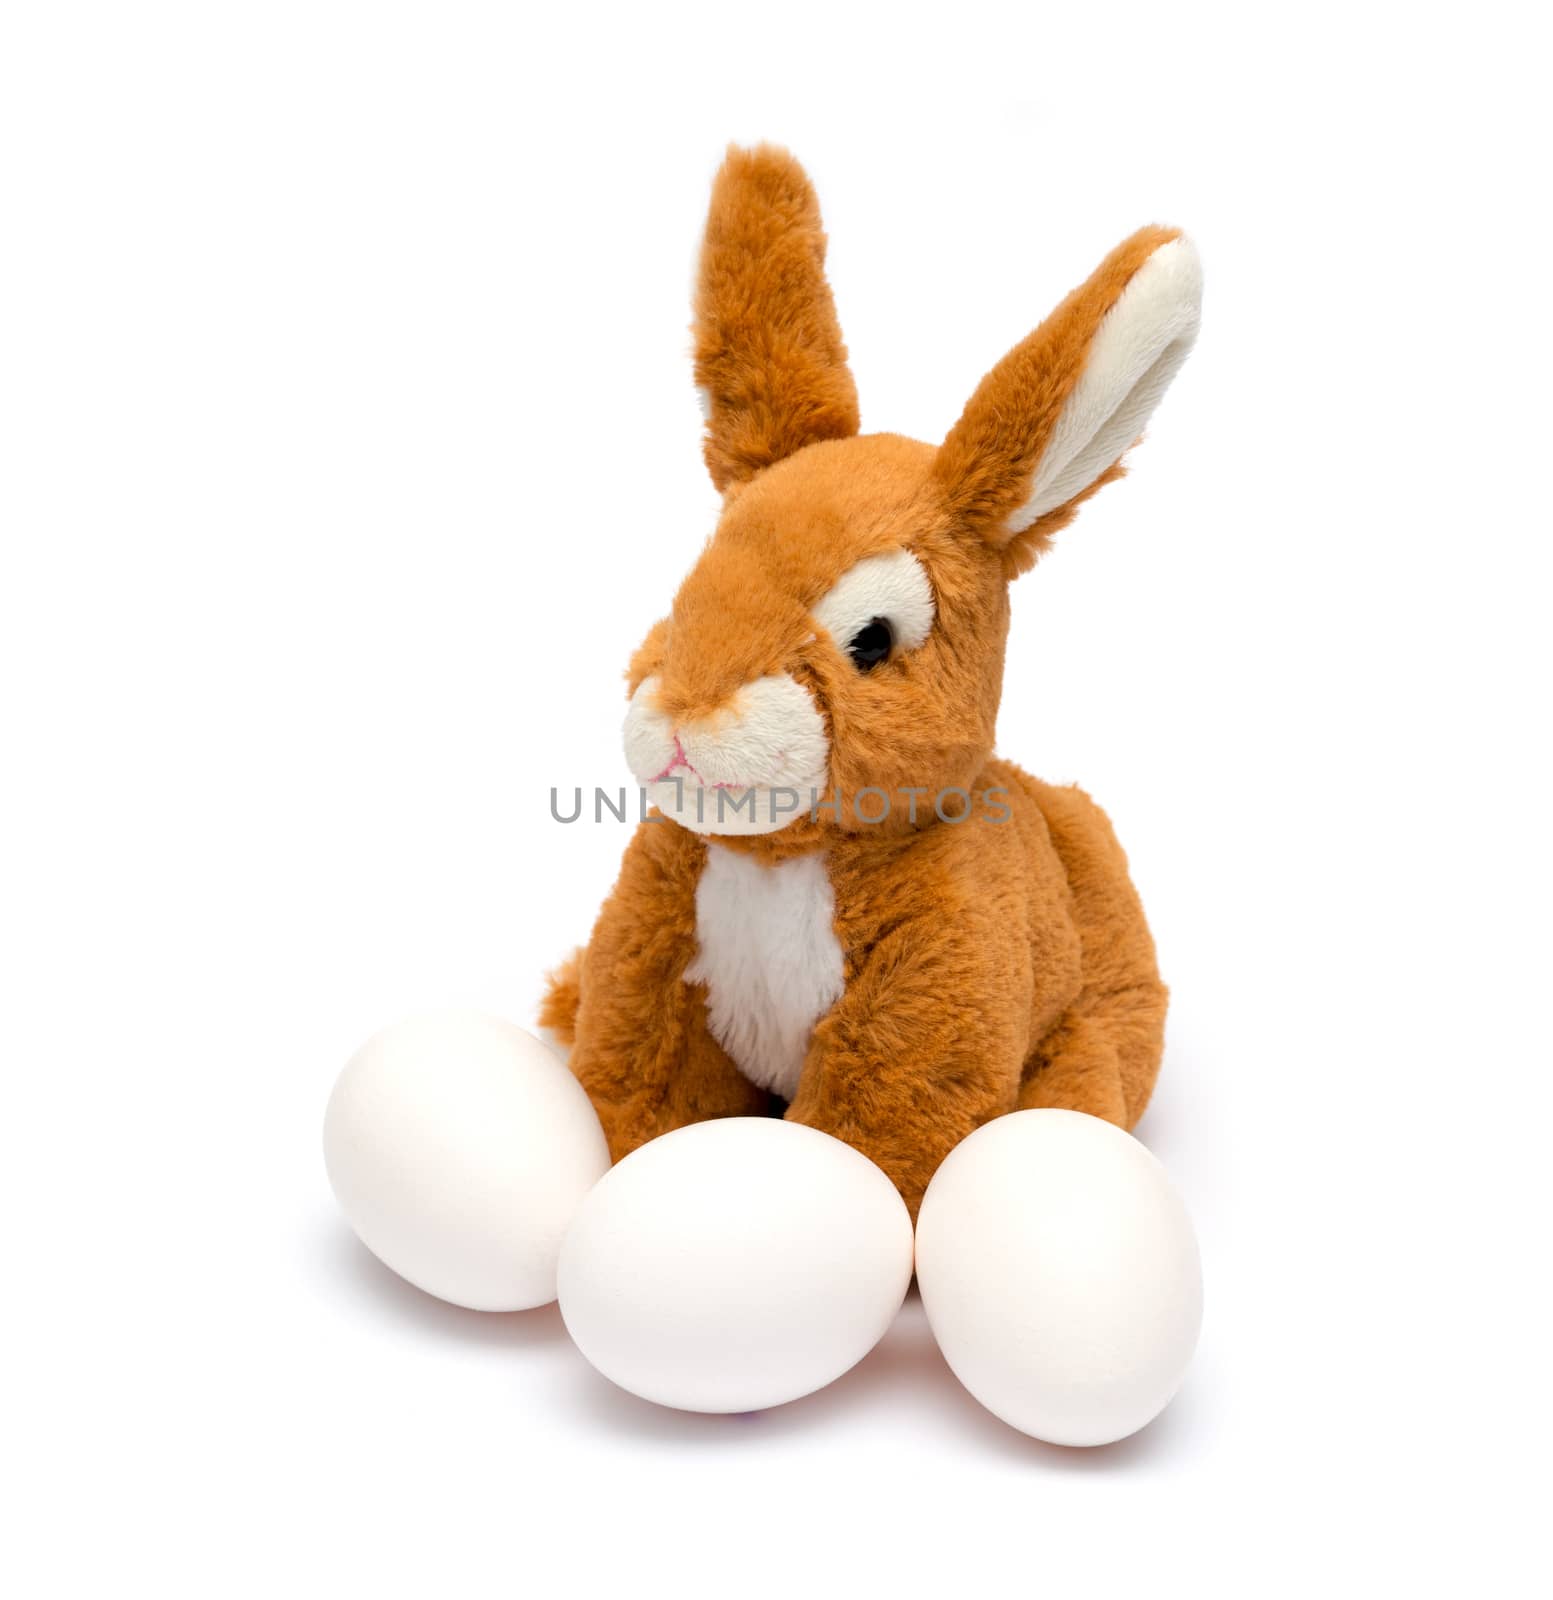 Easter rabbit and egg. Isolated on a white background.